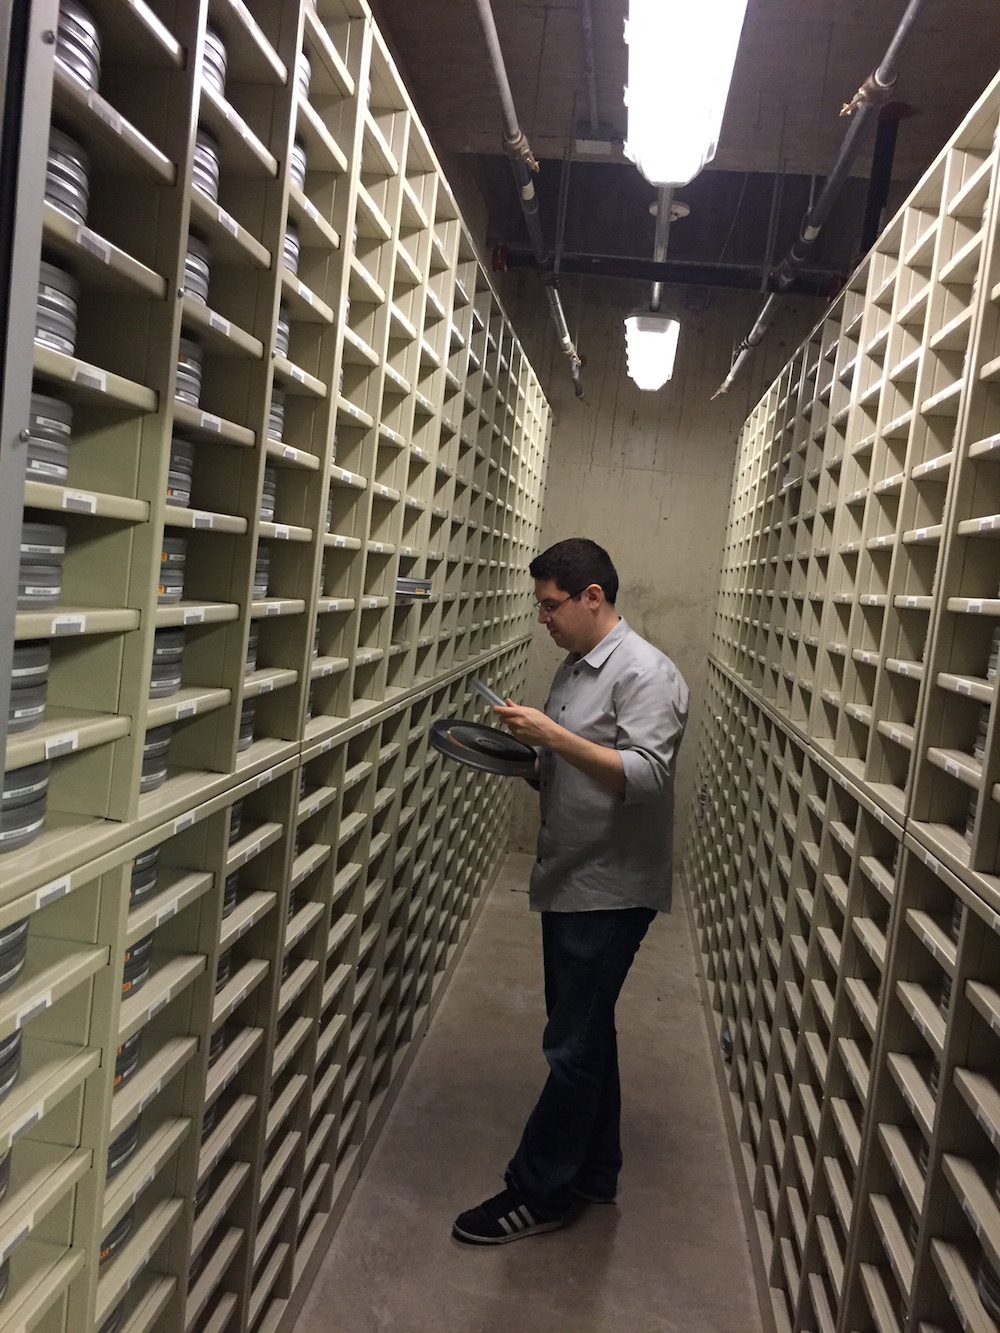 Brian Cruz at the Library of Congress - National Audiovisual Conservation Center